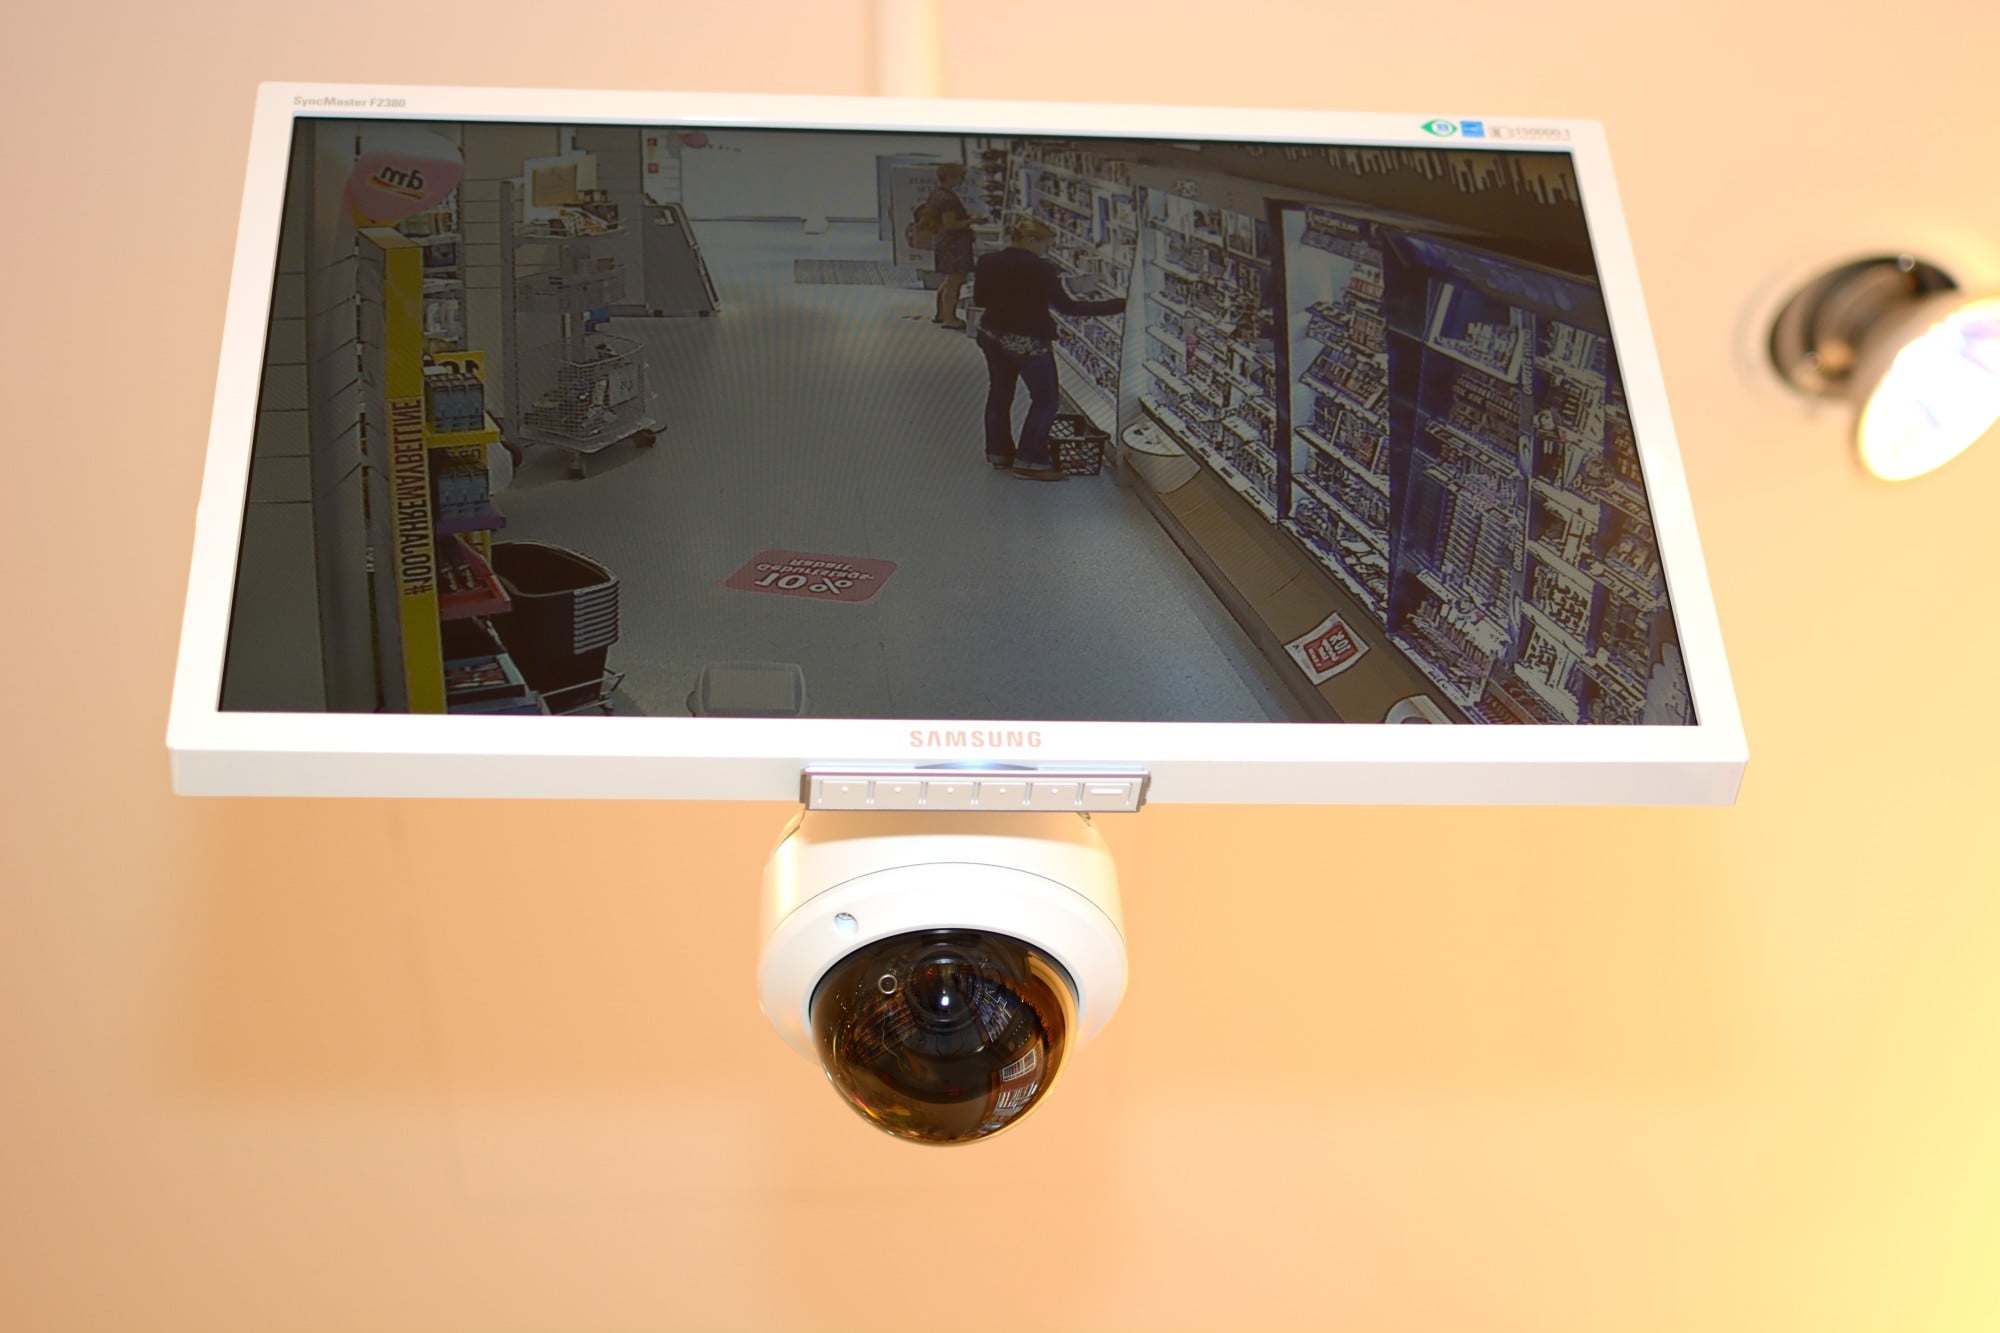 19 Ways Your Business Can Benefit from Security Cameras